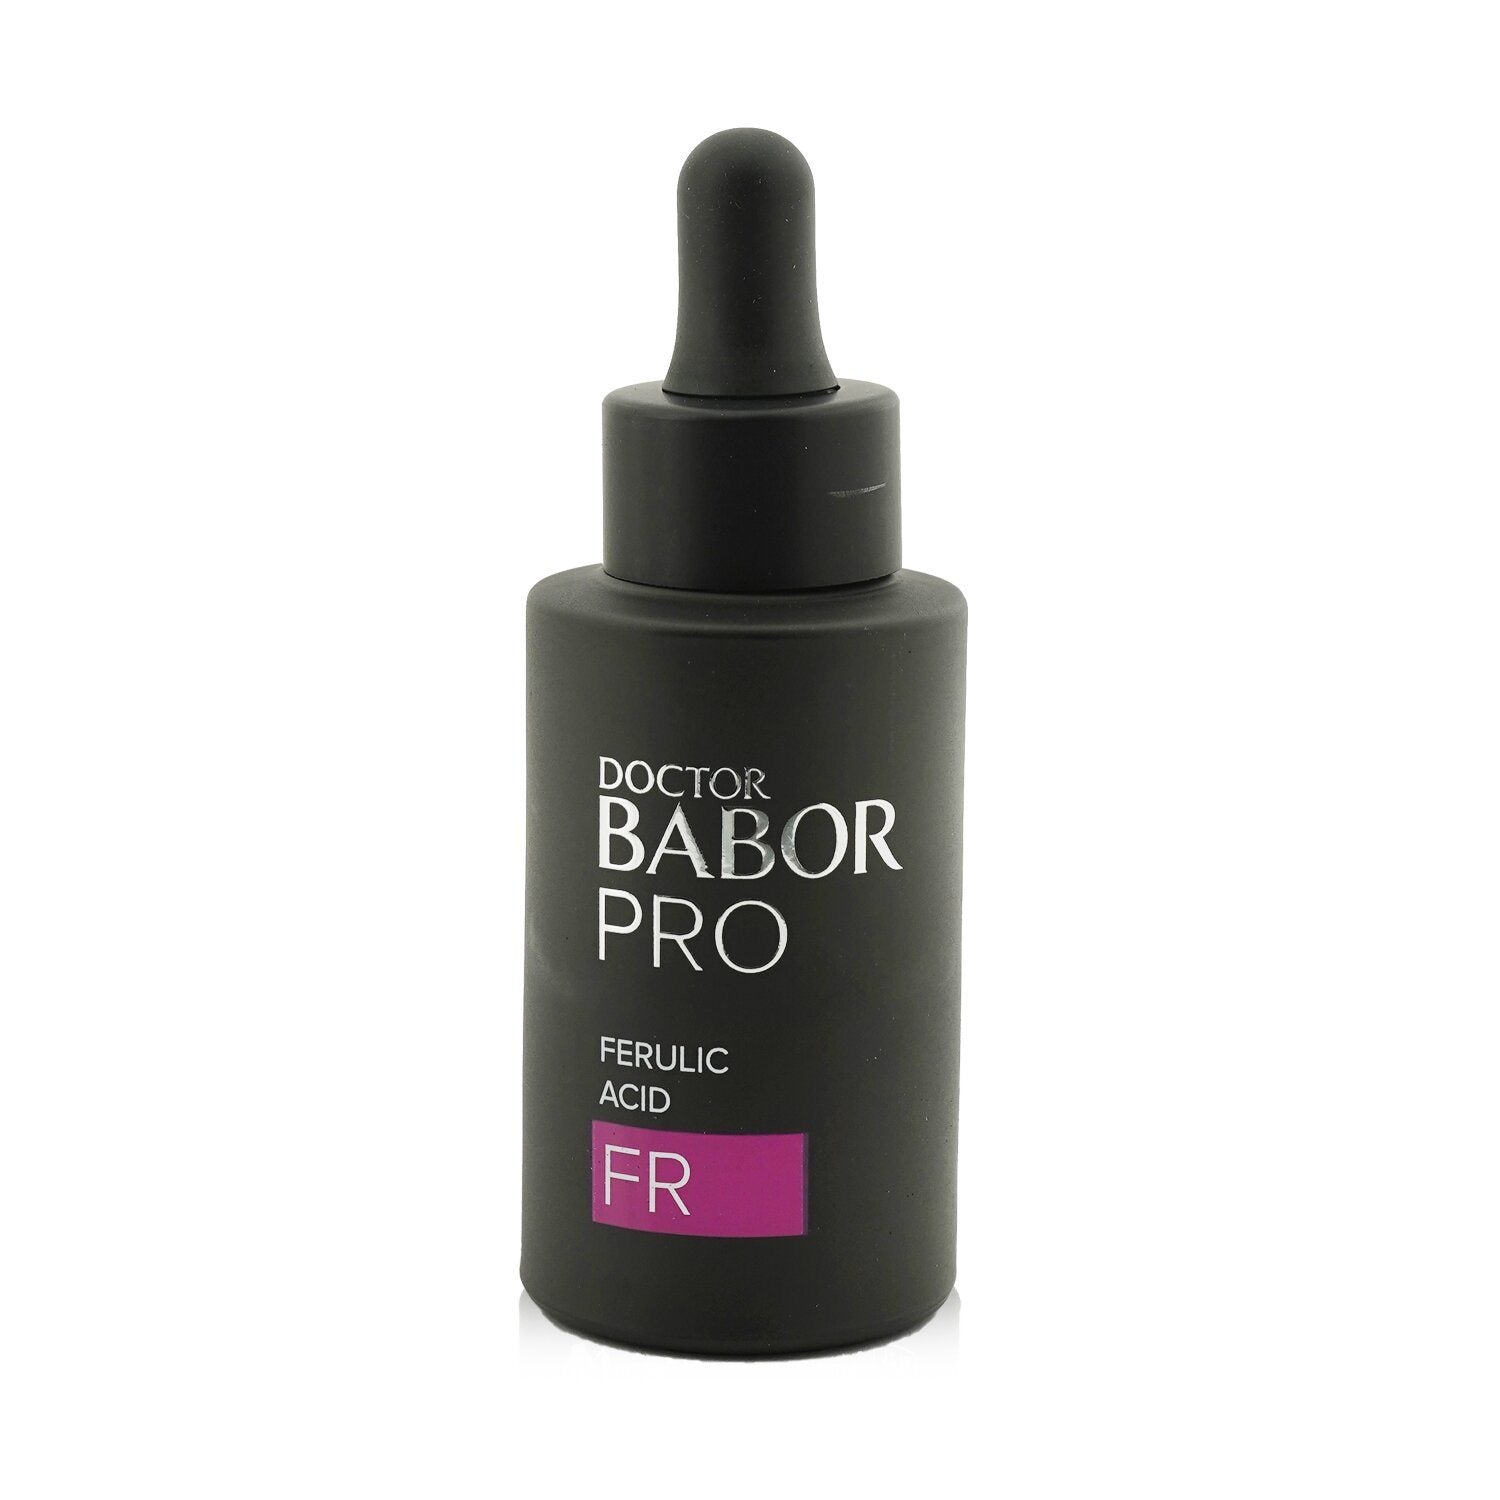 BABOR - Doctor Babor Pro FR Ferulic Acid Concentrate - 30ml/1oz 3P's Inclusive Beauty